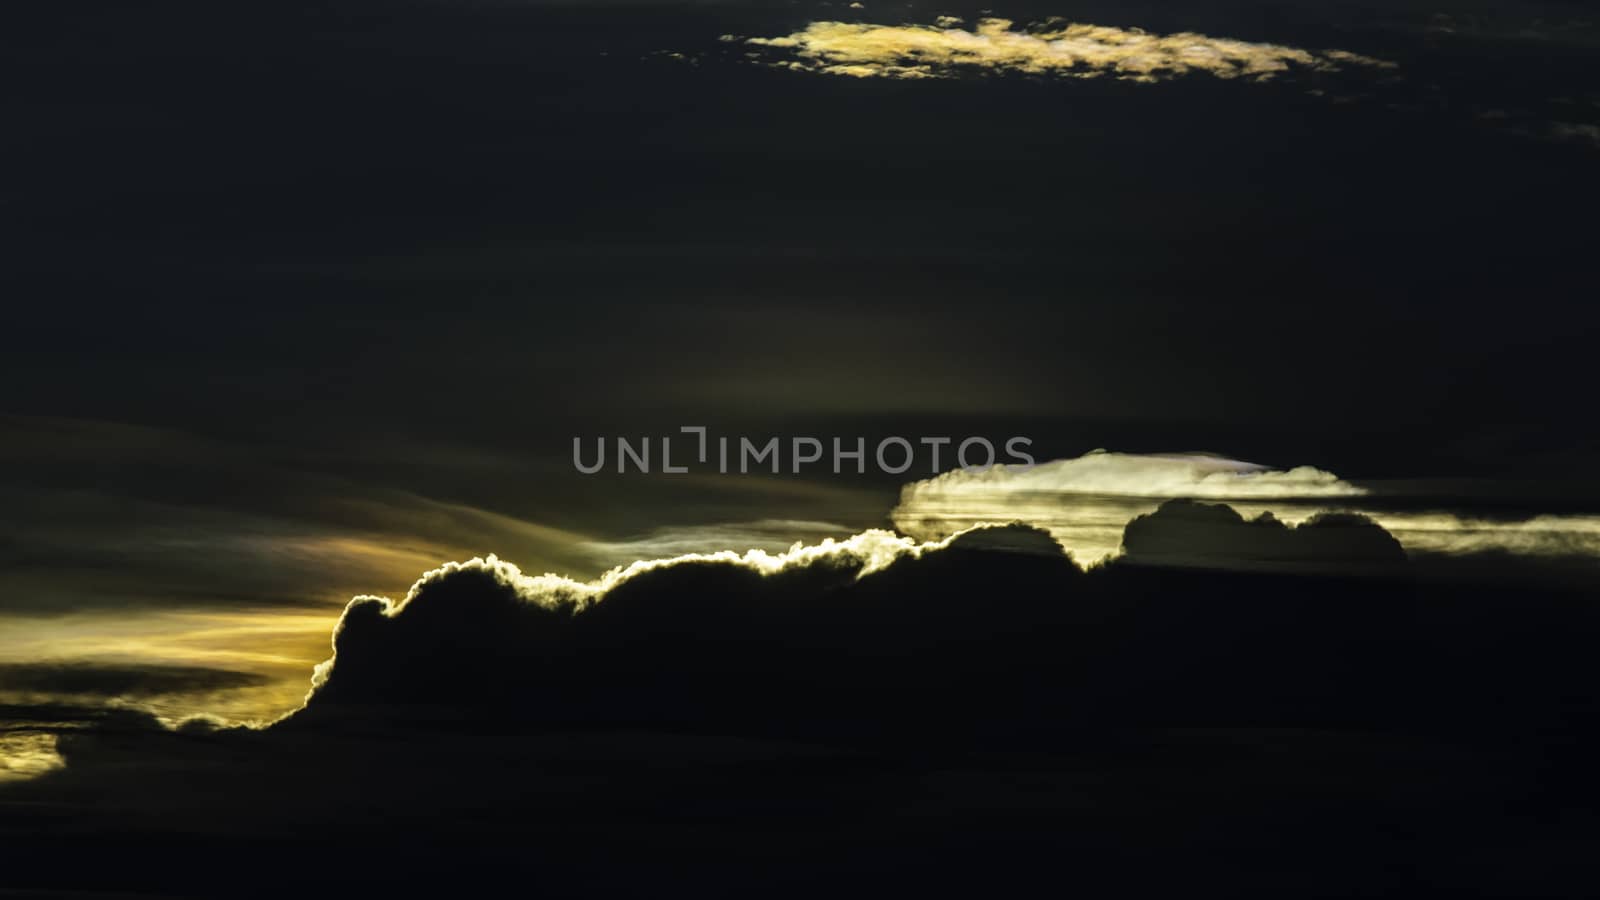 Silhouette of cloud with Iridescence sky  by pixbox77